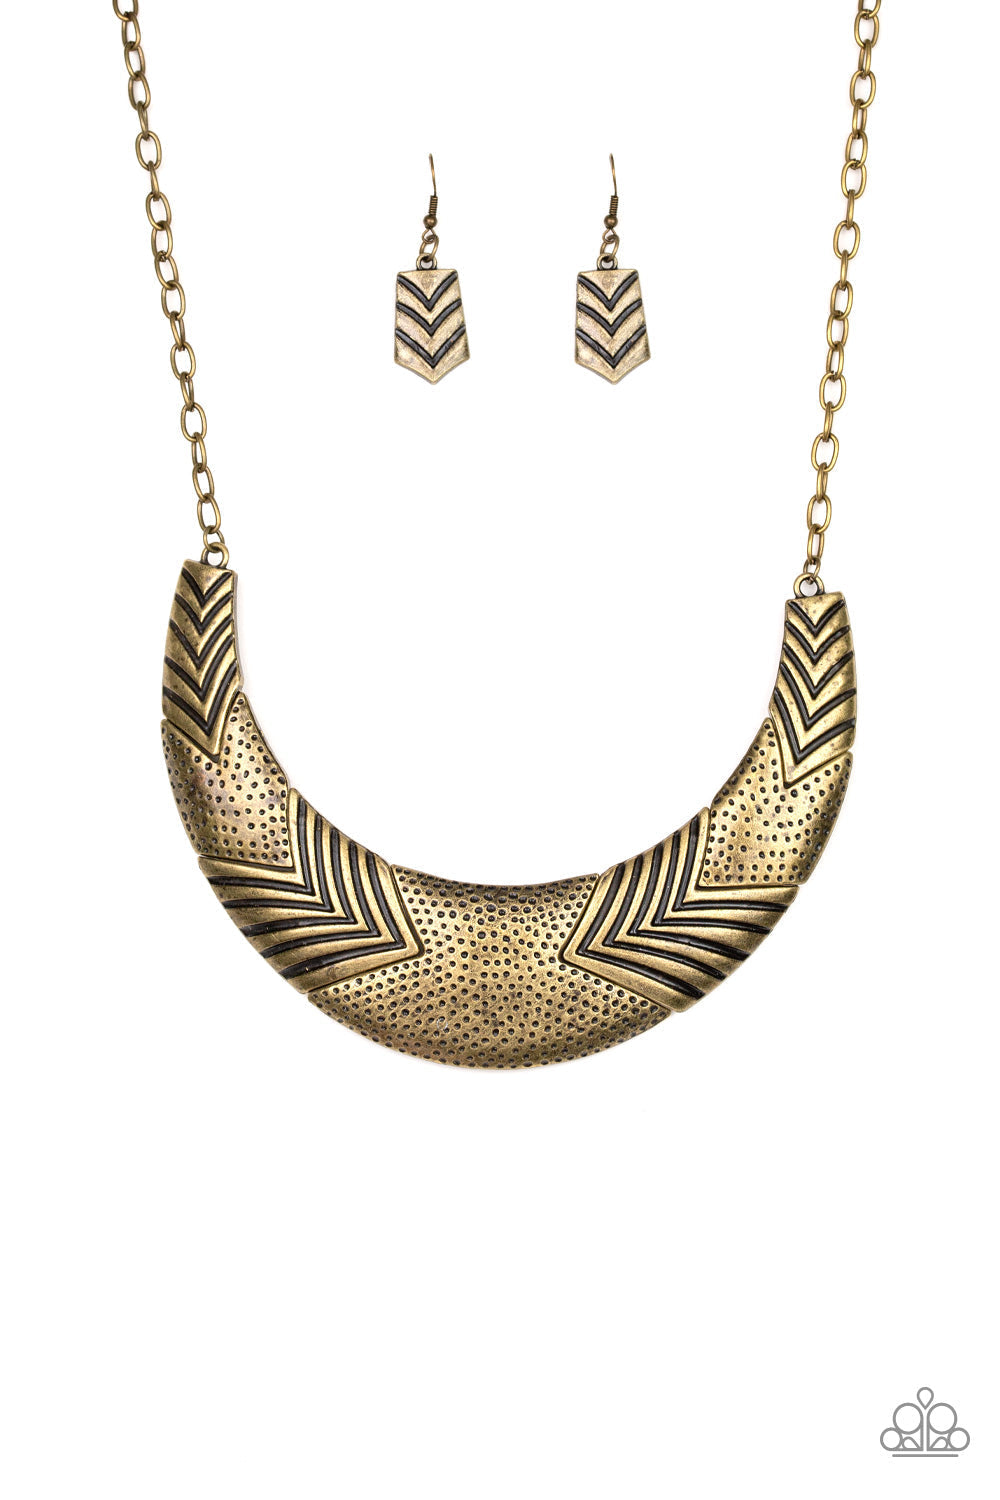 Geographic Goddess - Brass Fashion Necklace - Paparazzi Accessories - Featuring angular shapes, a collection of hammered and chevron-like stamped frames connect below the collar, coalescing into a bold statement necklace.